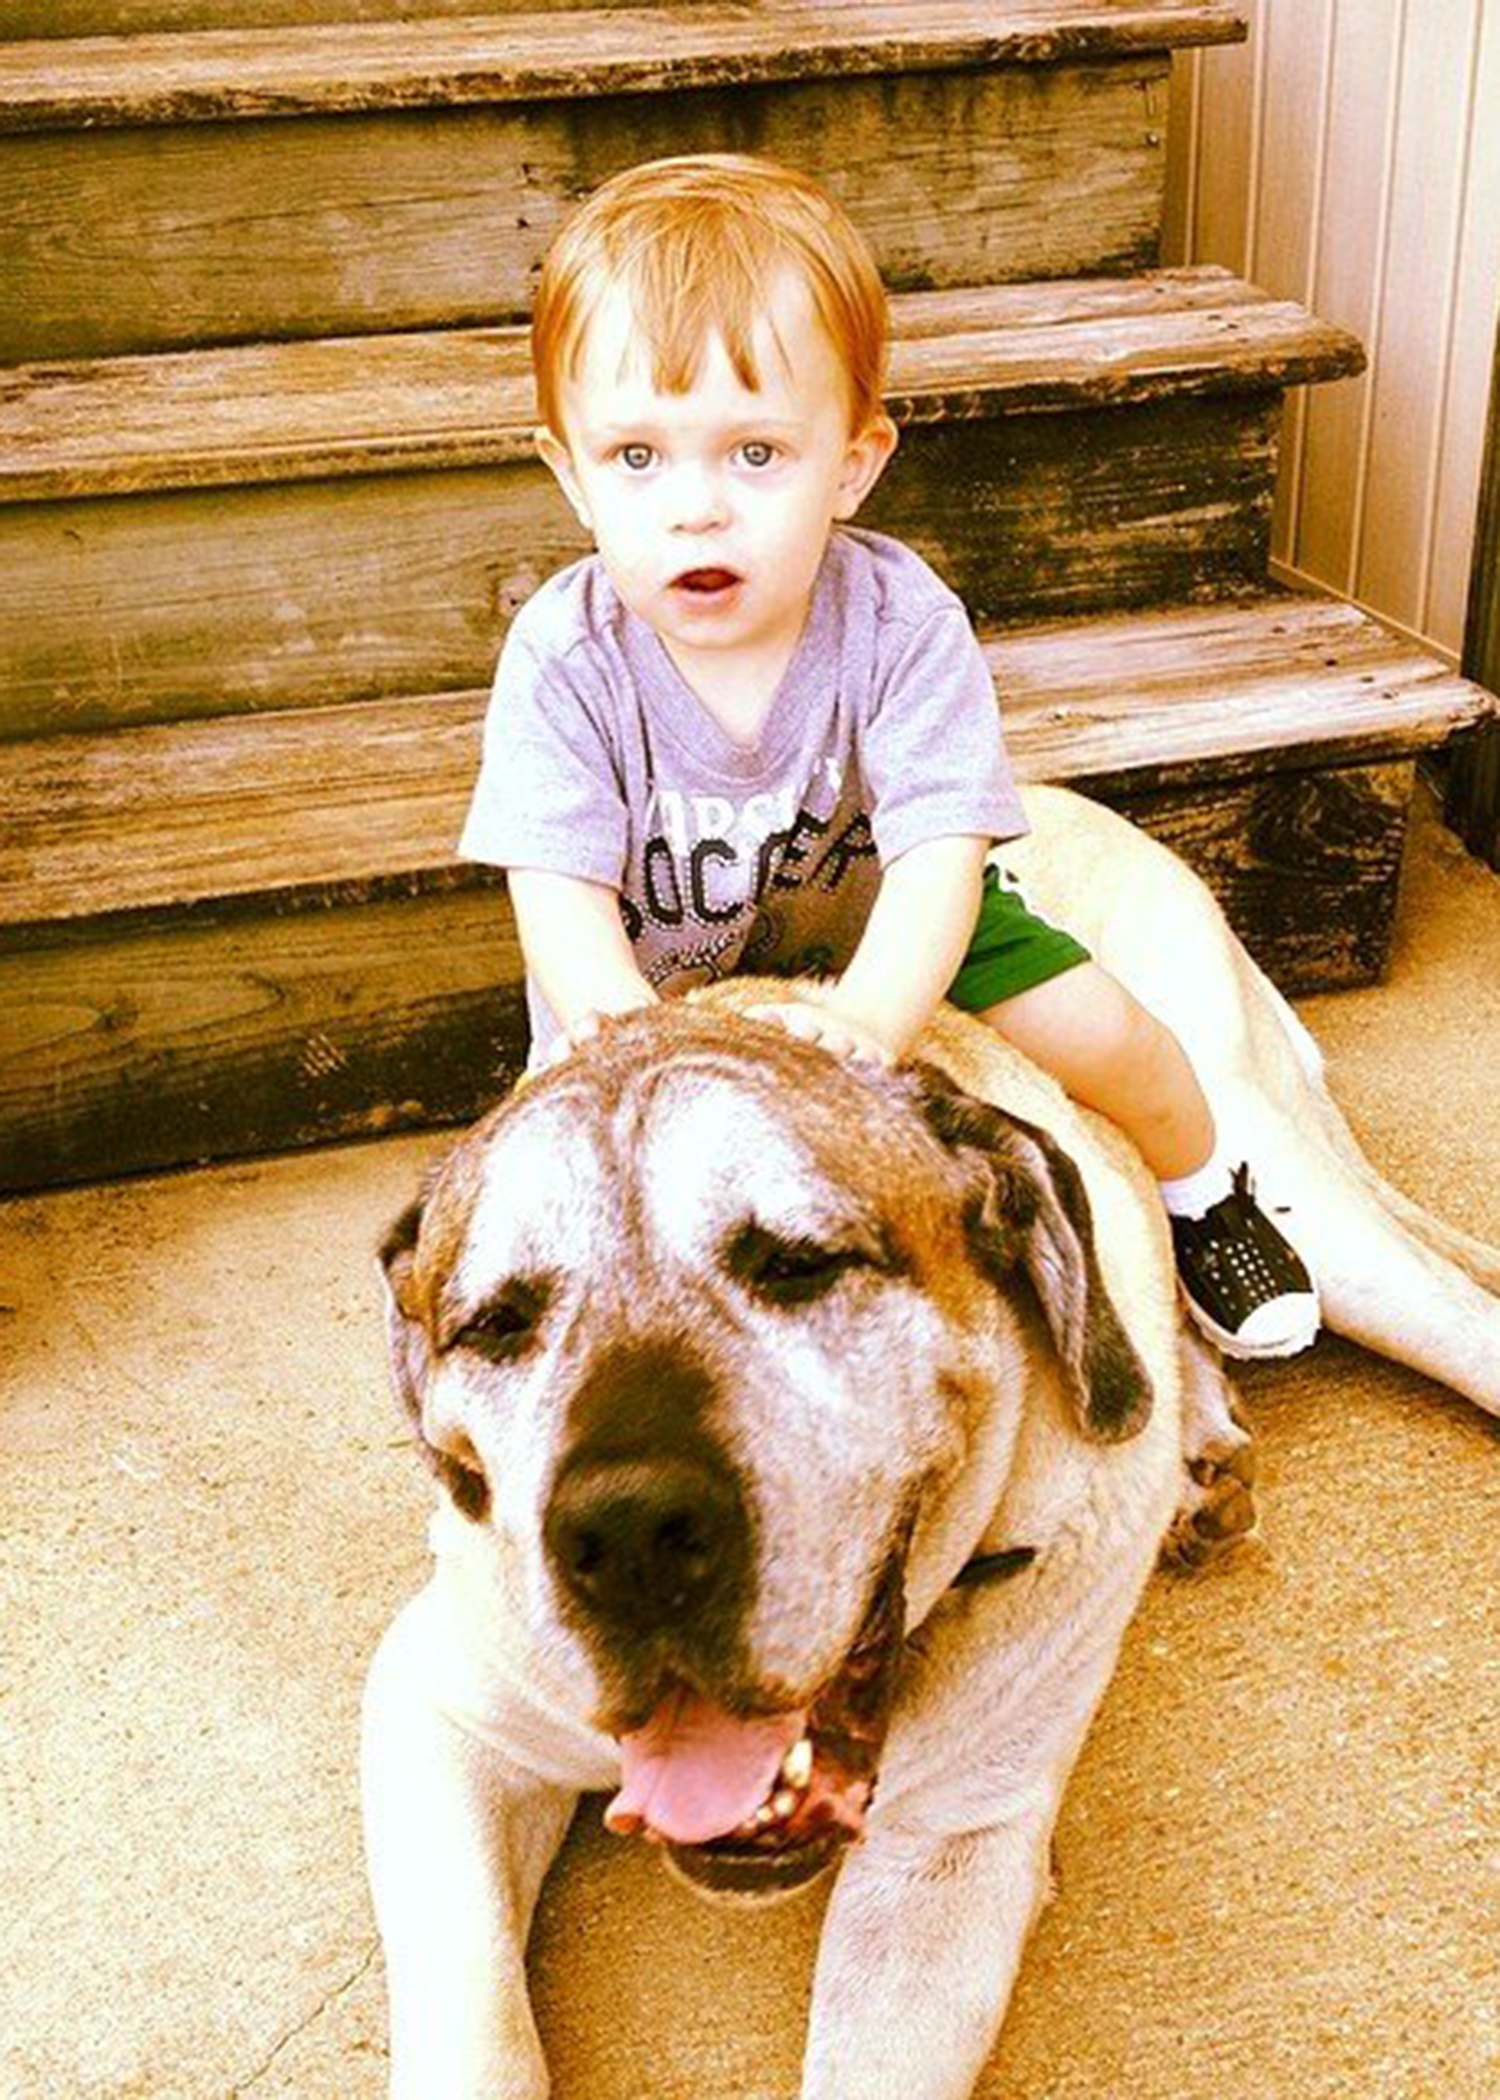 When Ray and Vanessa Beeson’s dog Thor died in 2016, the family decided to have him necropsied to forward the science being done at the Mississippi State University College of Veterinary Medicine. Thor is seen here with then 2-year-old Avett Beeson. (Submitted Photo/Vanessa Beeson)